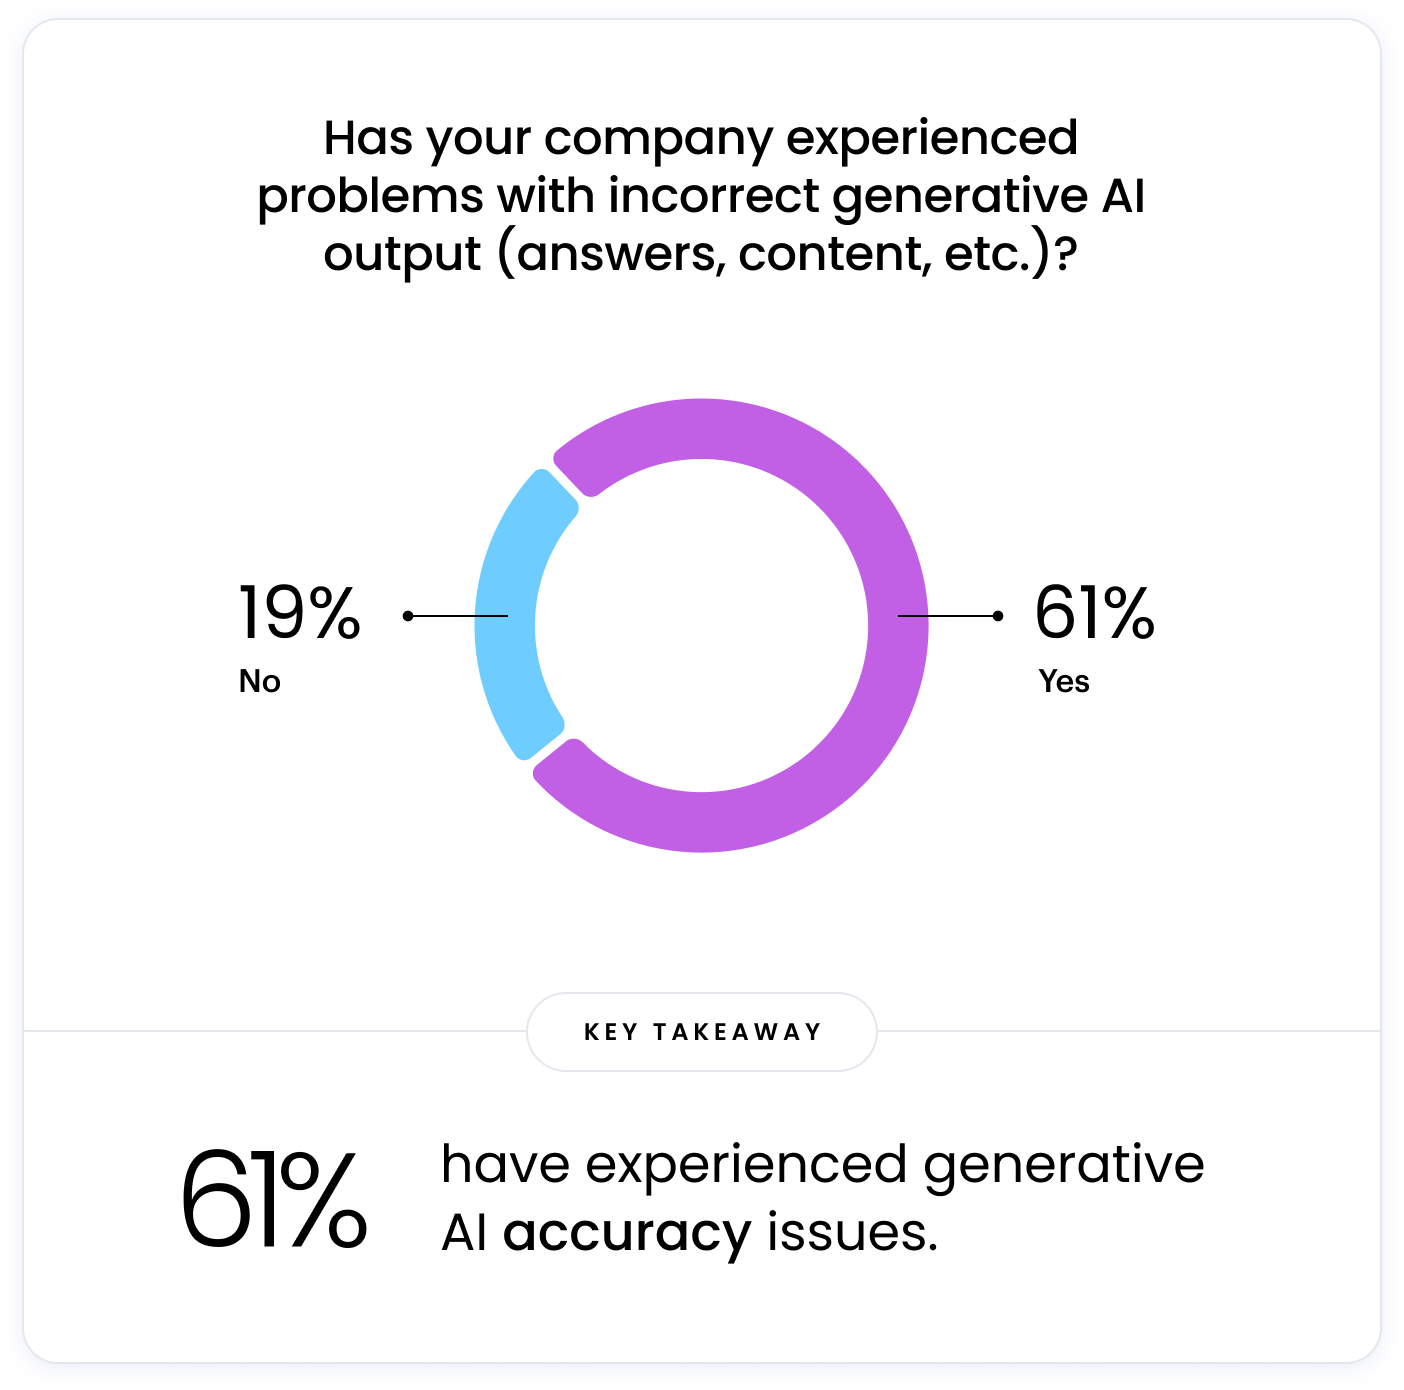 The image shows a pie chart of the responses to the question "Is your company considering a private AI solution for your company?". The choices were: - Yes, at least one is already deployed (37%) - Yes, but none are deployed yet (41%) - No, we don't plan on using a private generative AI solution (17%) - I didn't know private generative AI solutions were available (5%) The key takeaway is that 78% of companies are using or plan to use a private generative AI solution.